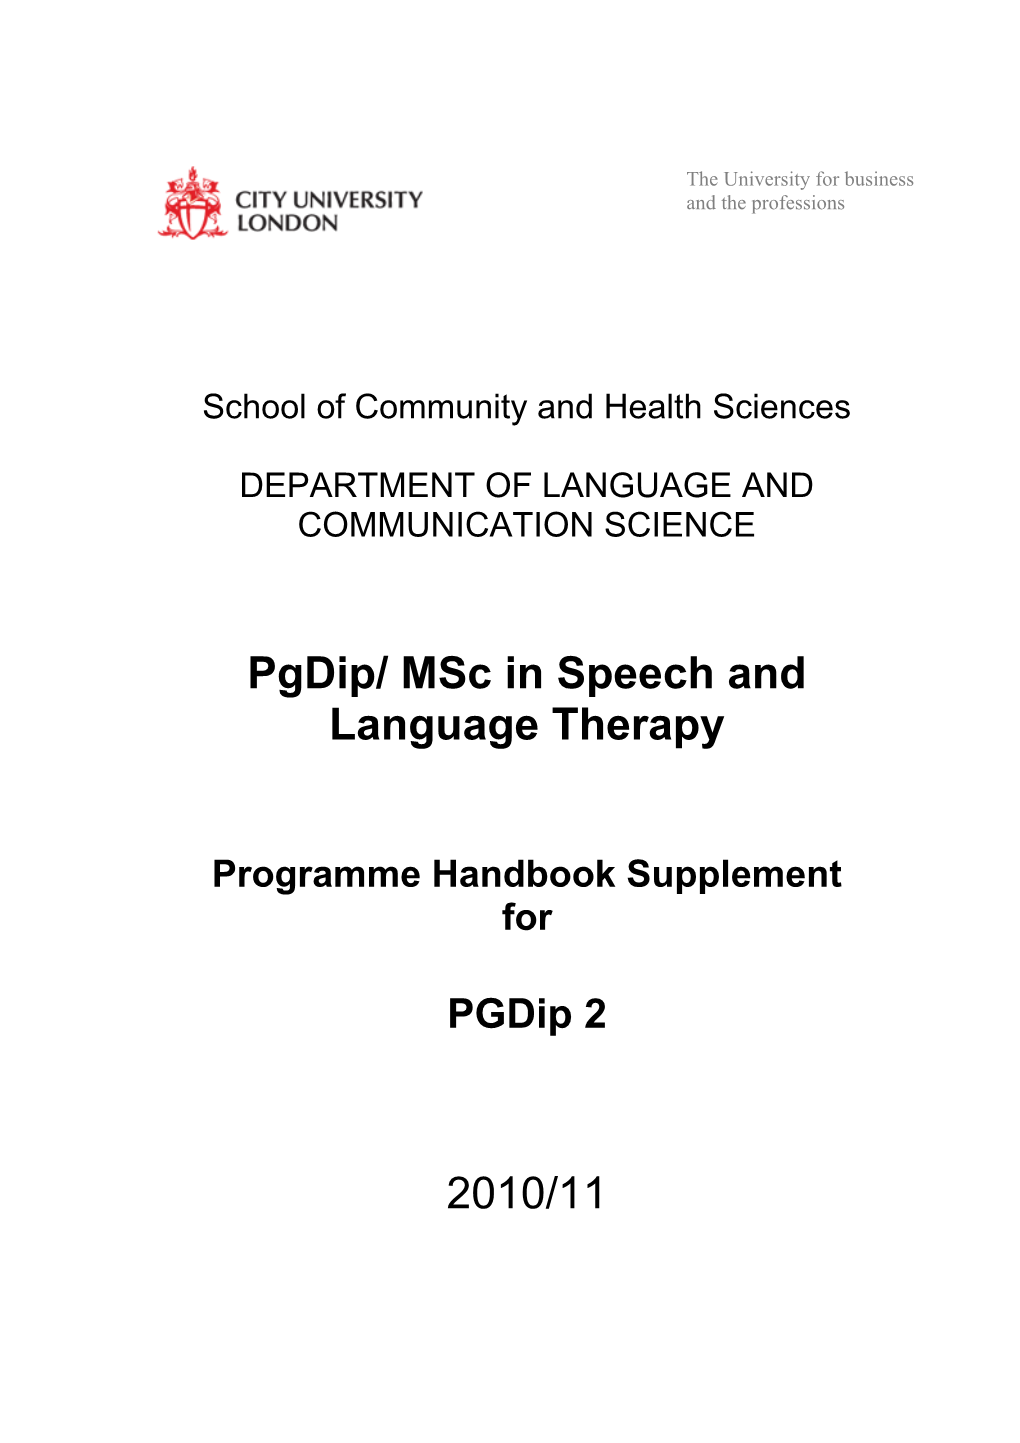 Pgdip/ Msc in Speech and Language Therapy